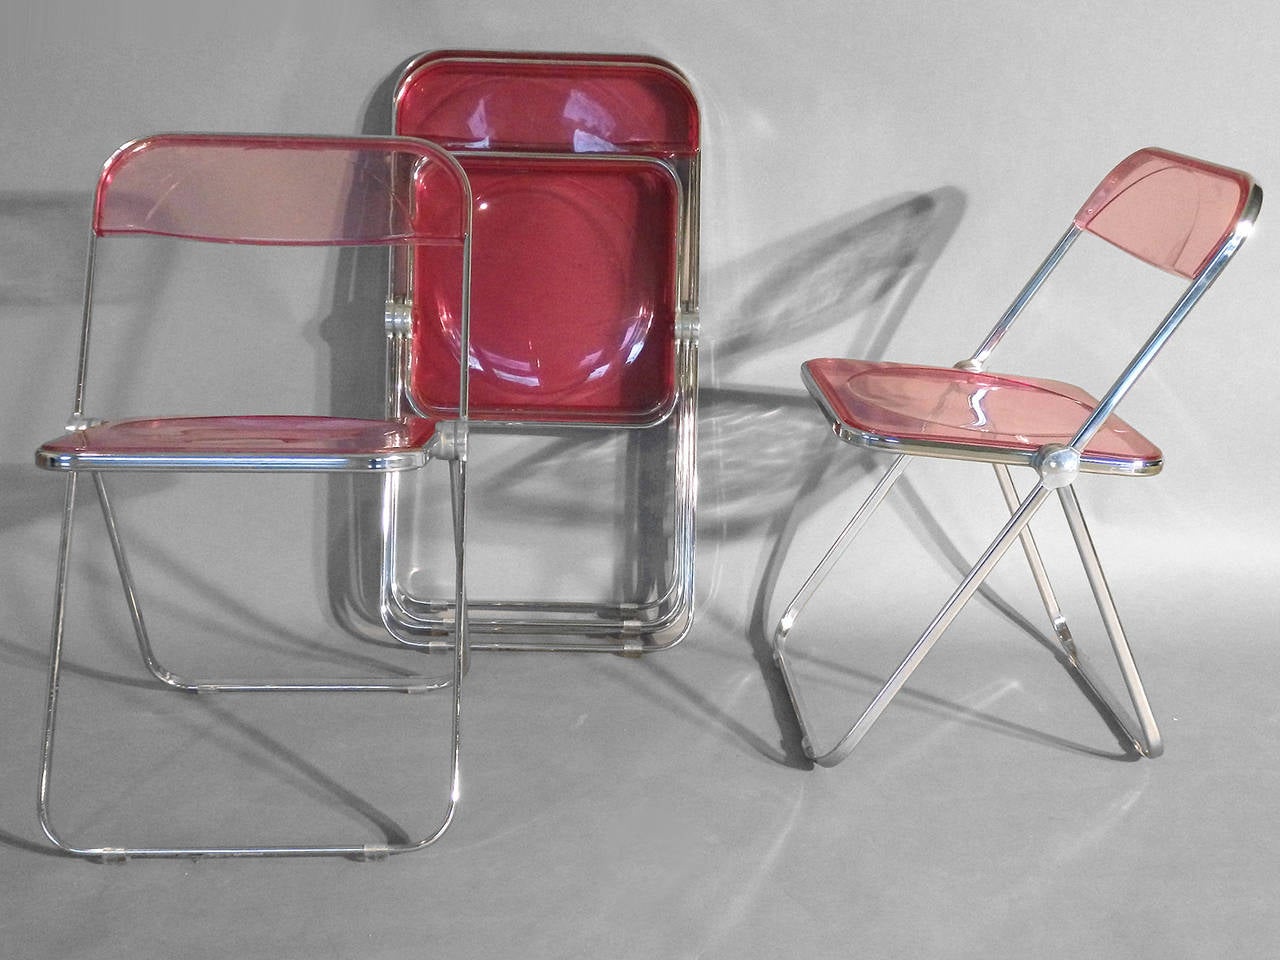 lucite folding chair